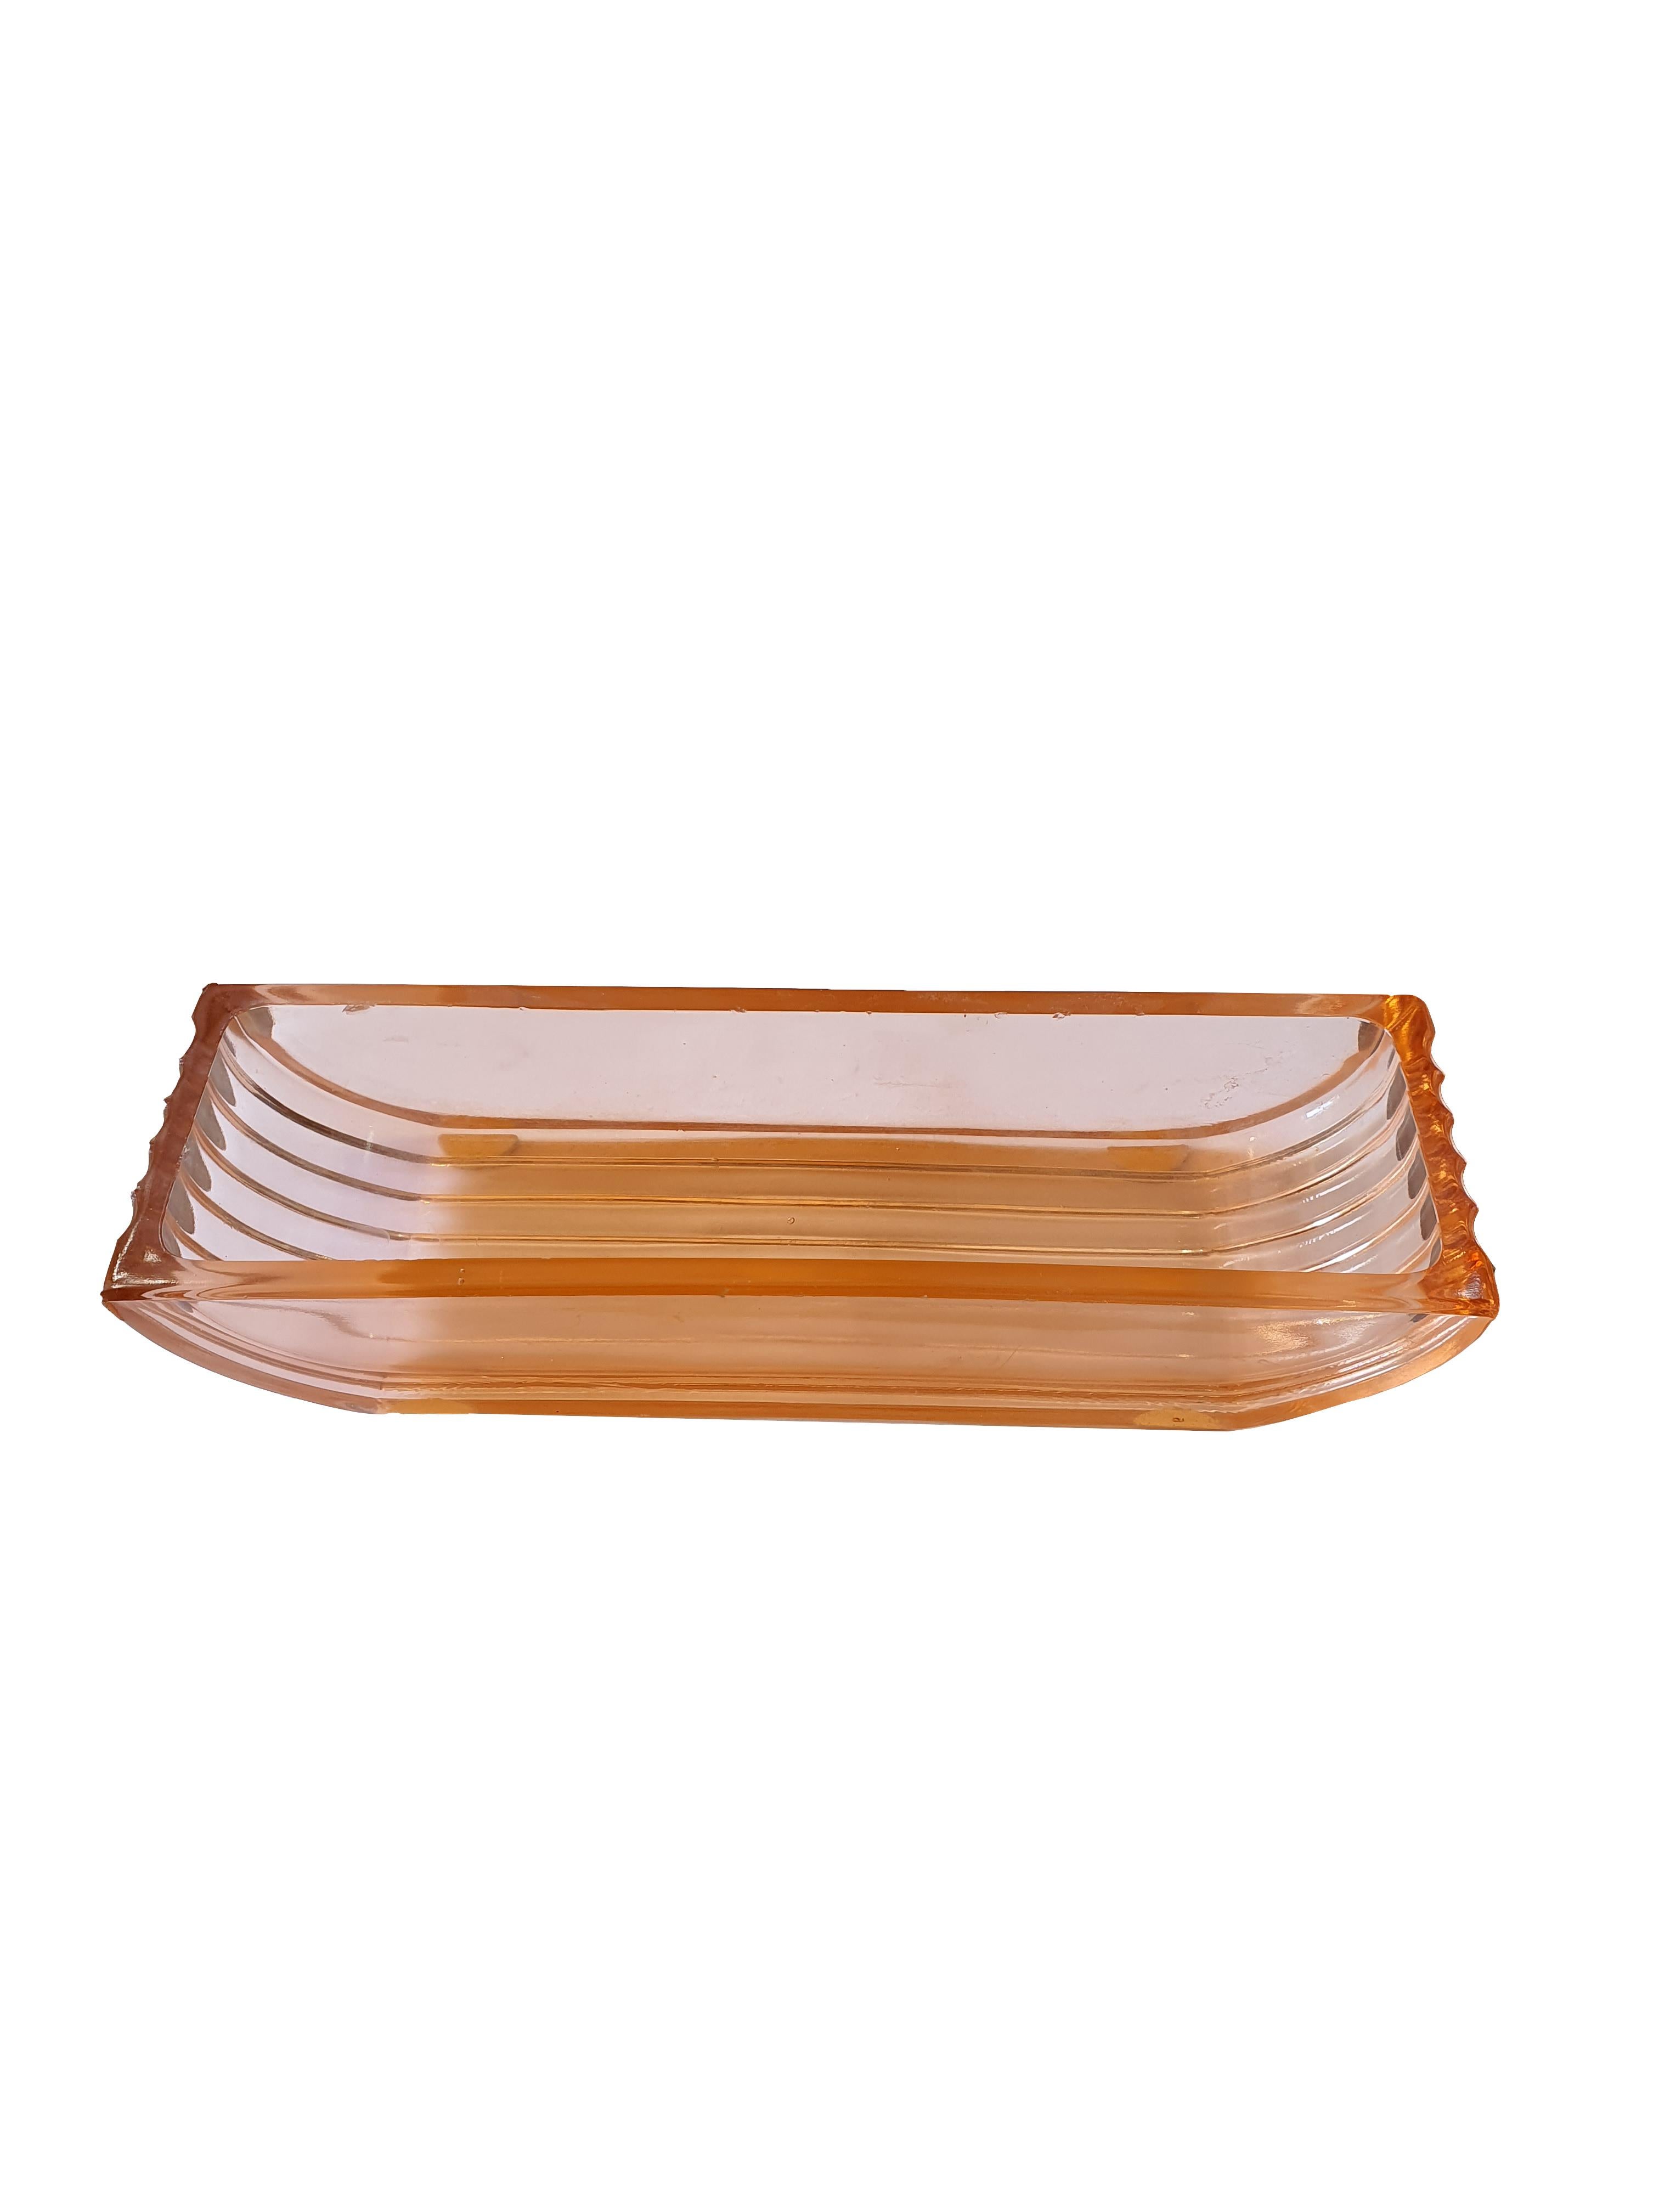 Murano glass tray, made in Italy. Dating back to around the 70s. Design object, which can also be used as a pen holder.